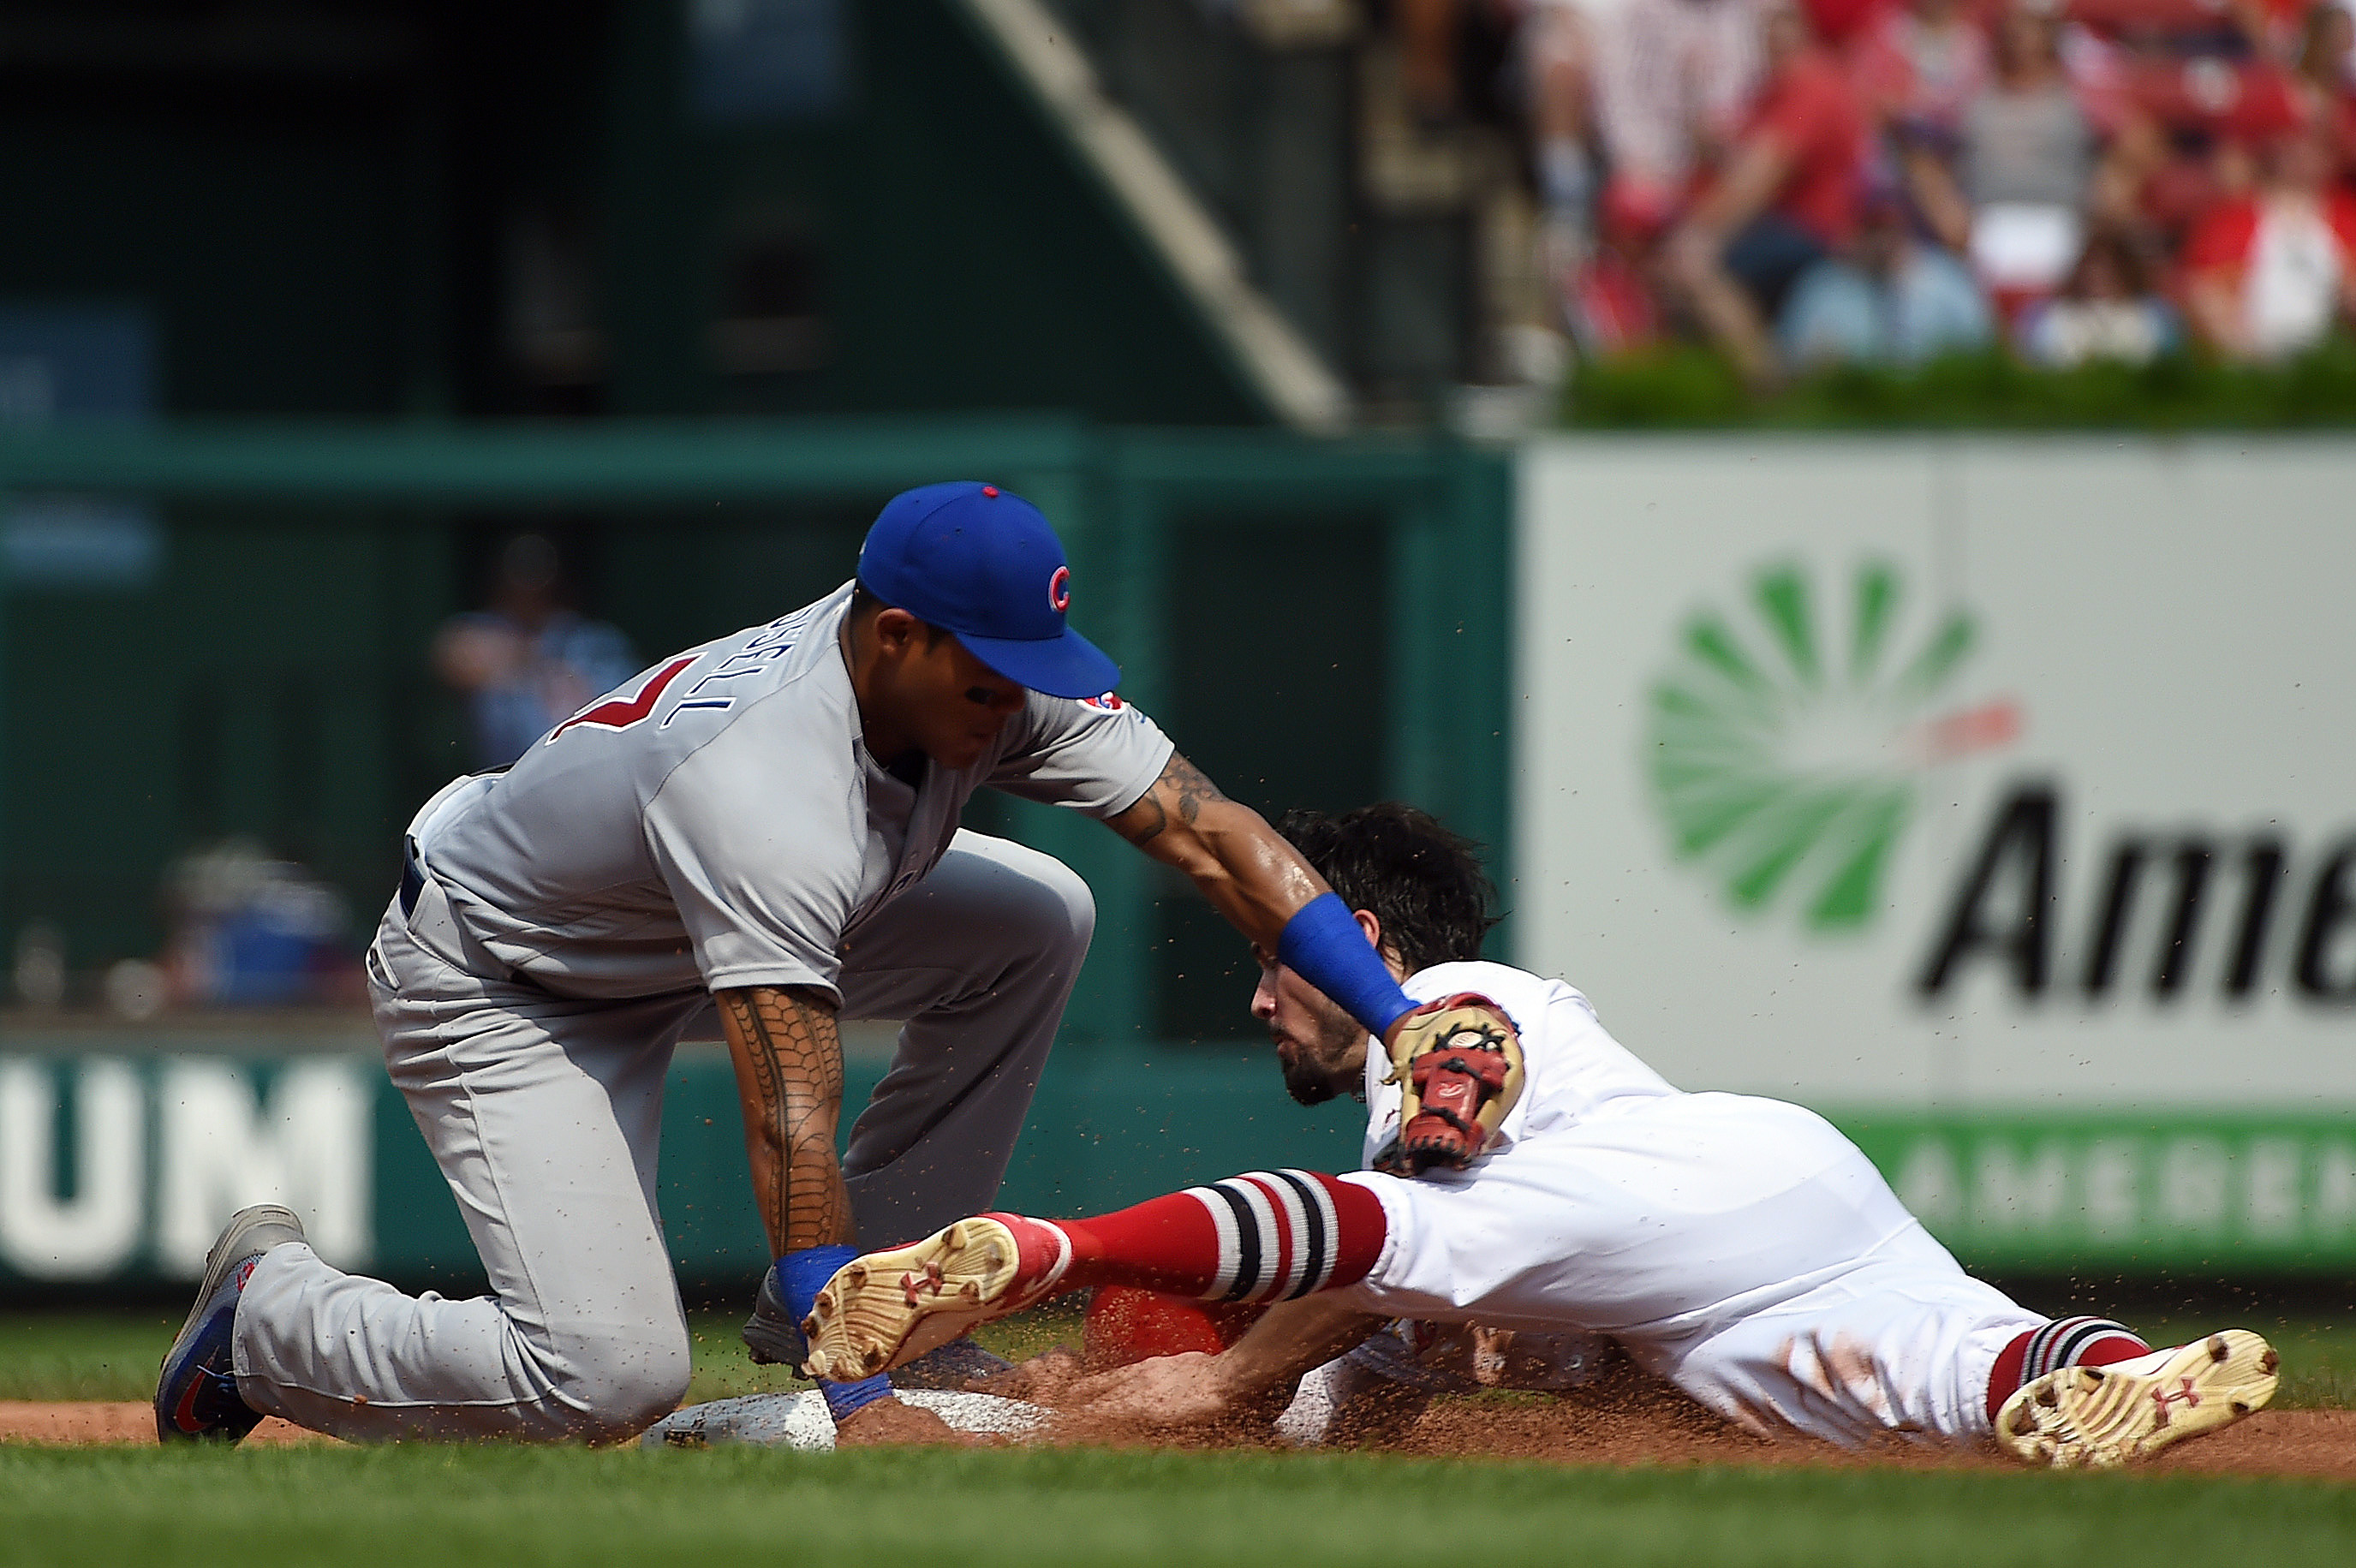 Chicago Cubs and St. Louis Cardinals among the best rivalries in baseball